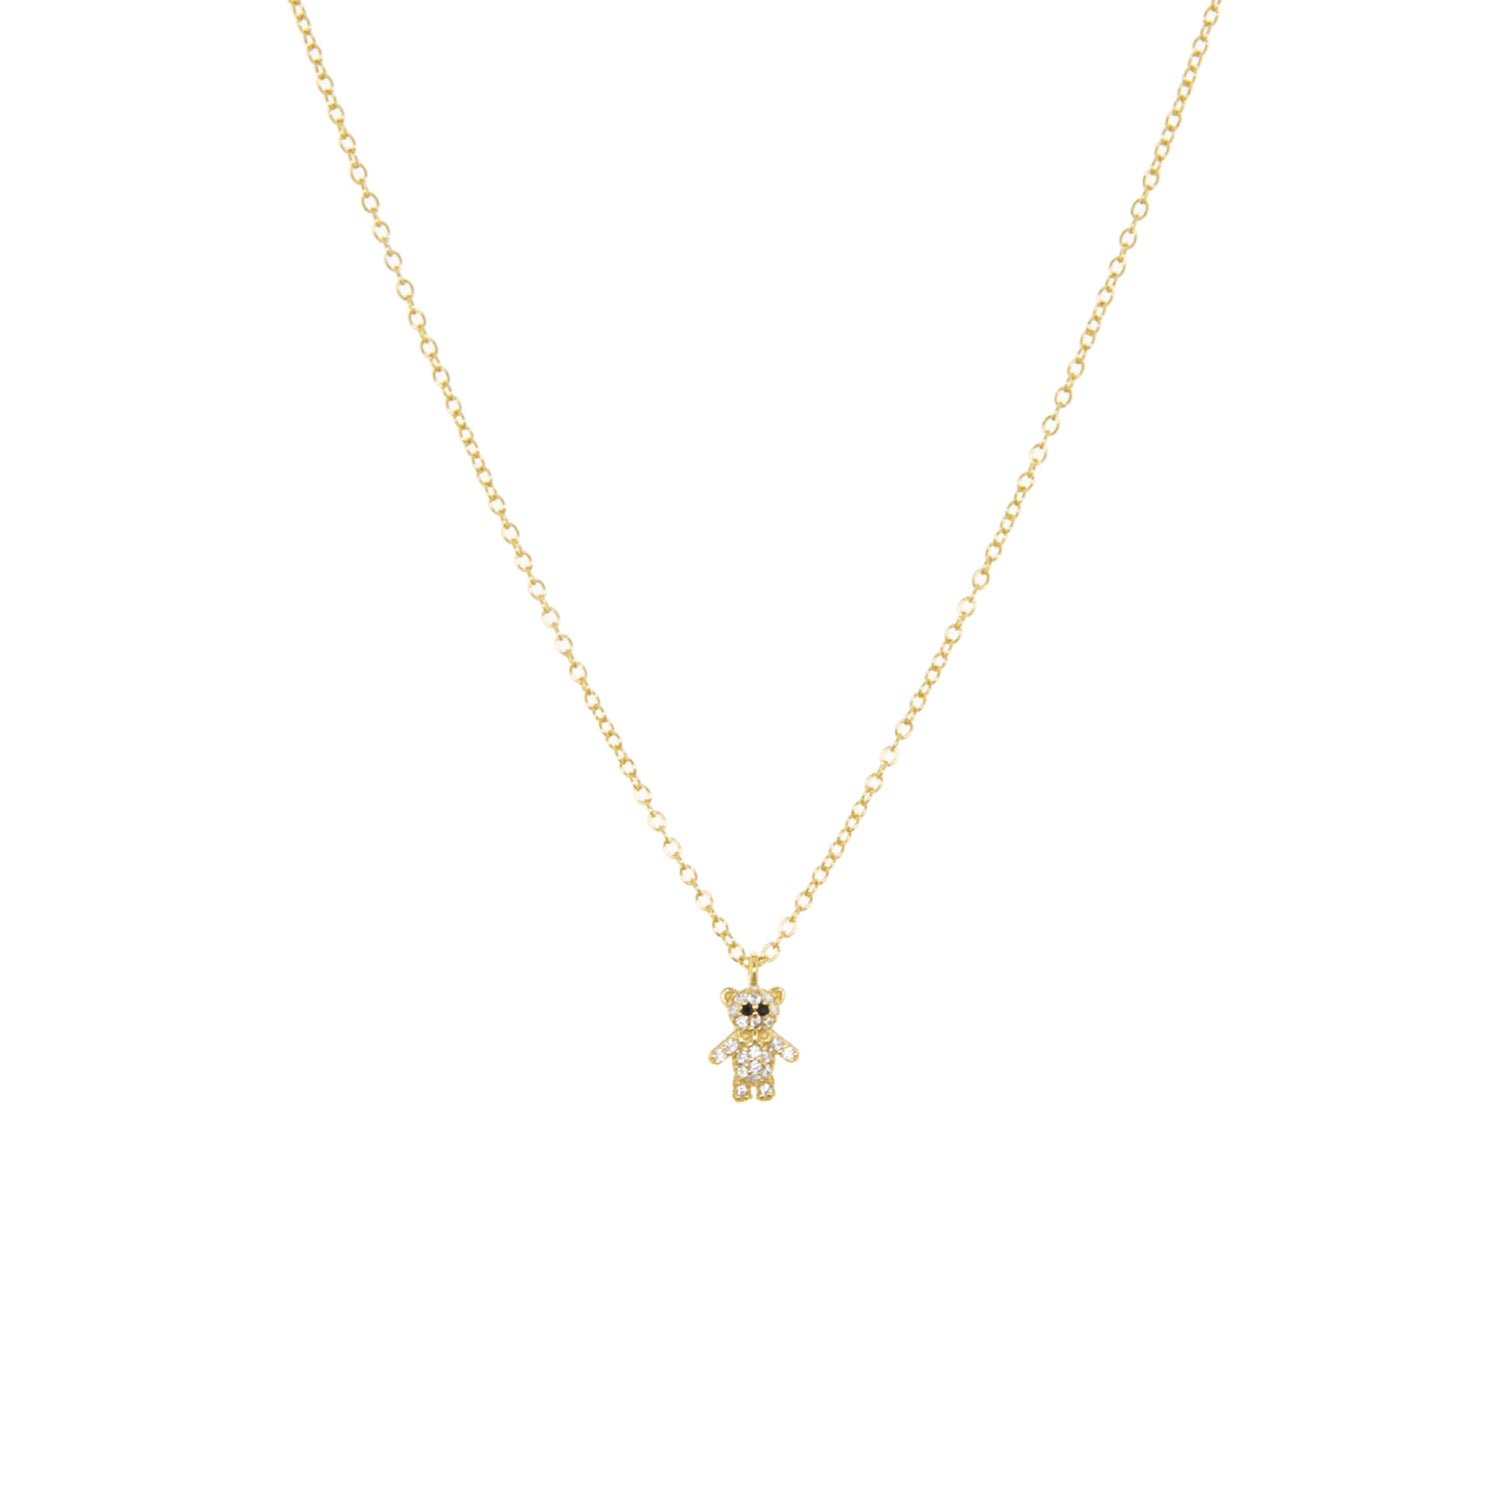 sterling/gold plated mini pave bear necklace